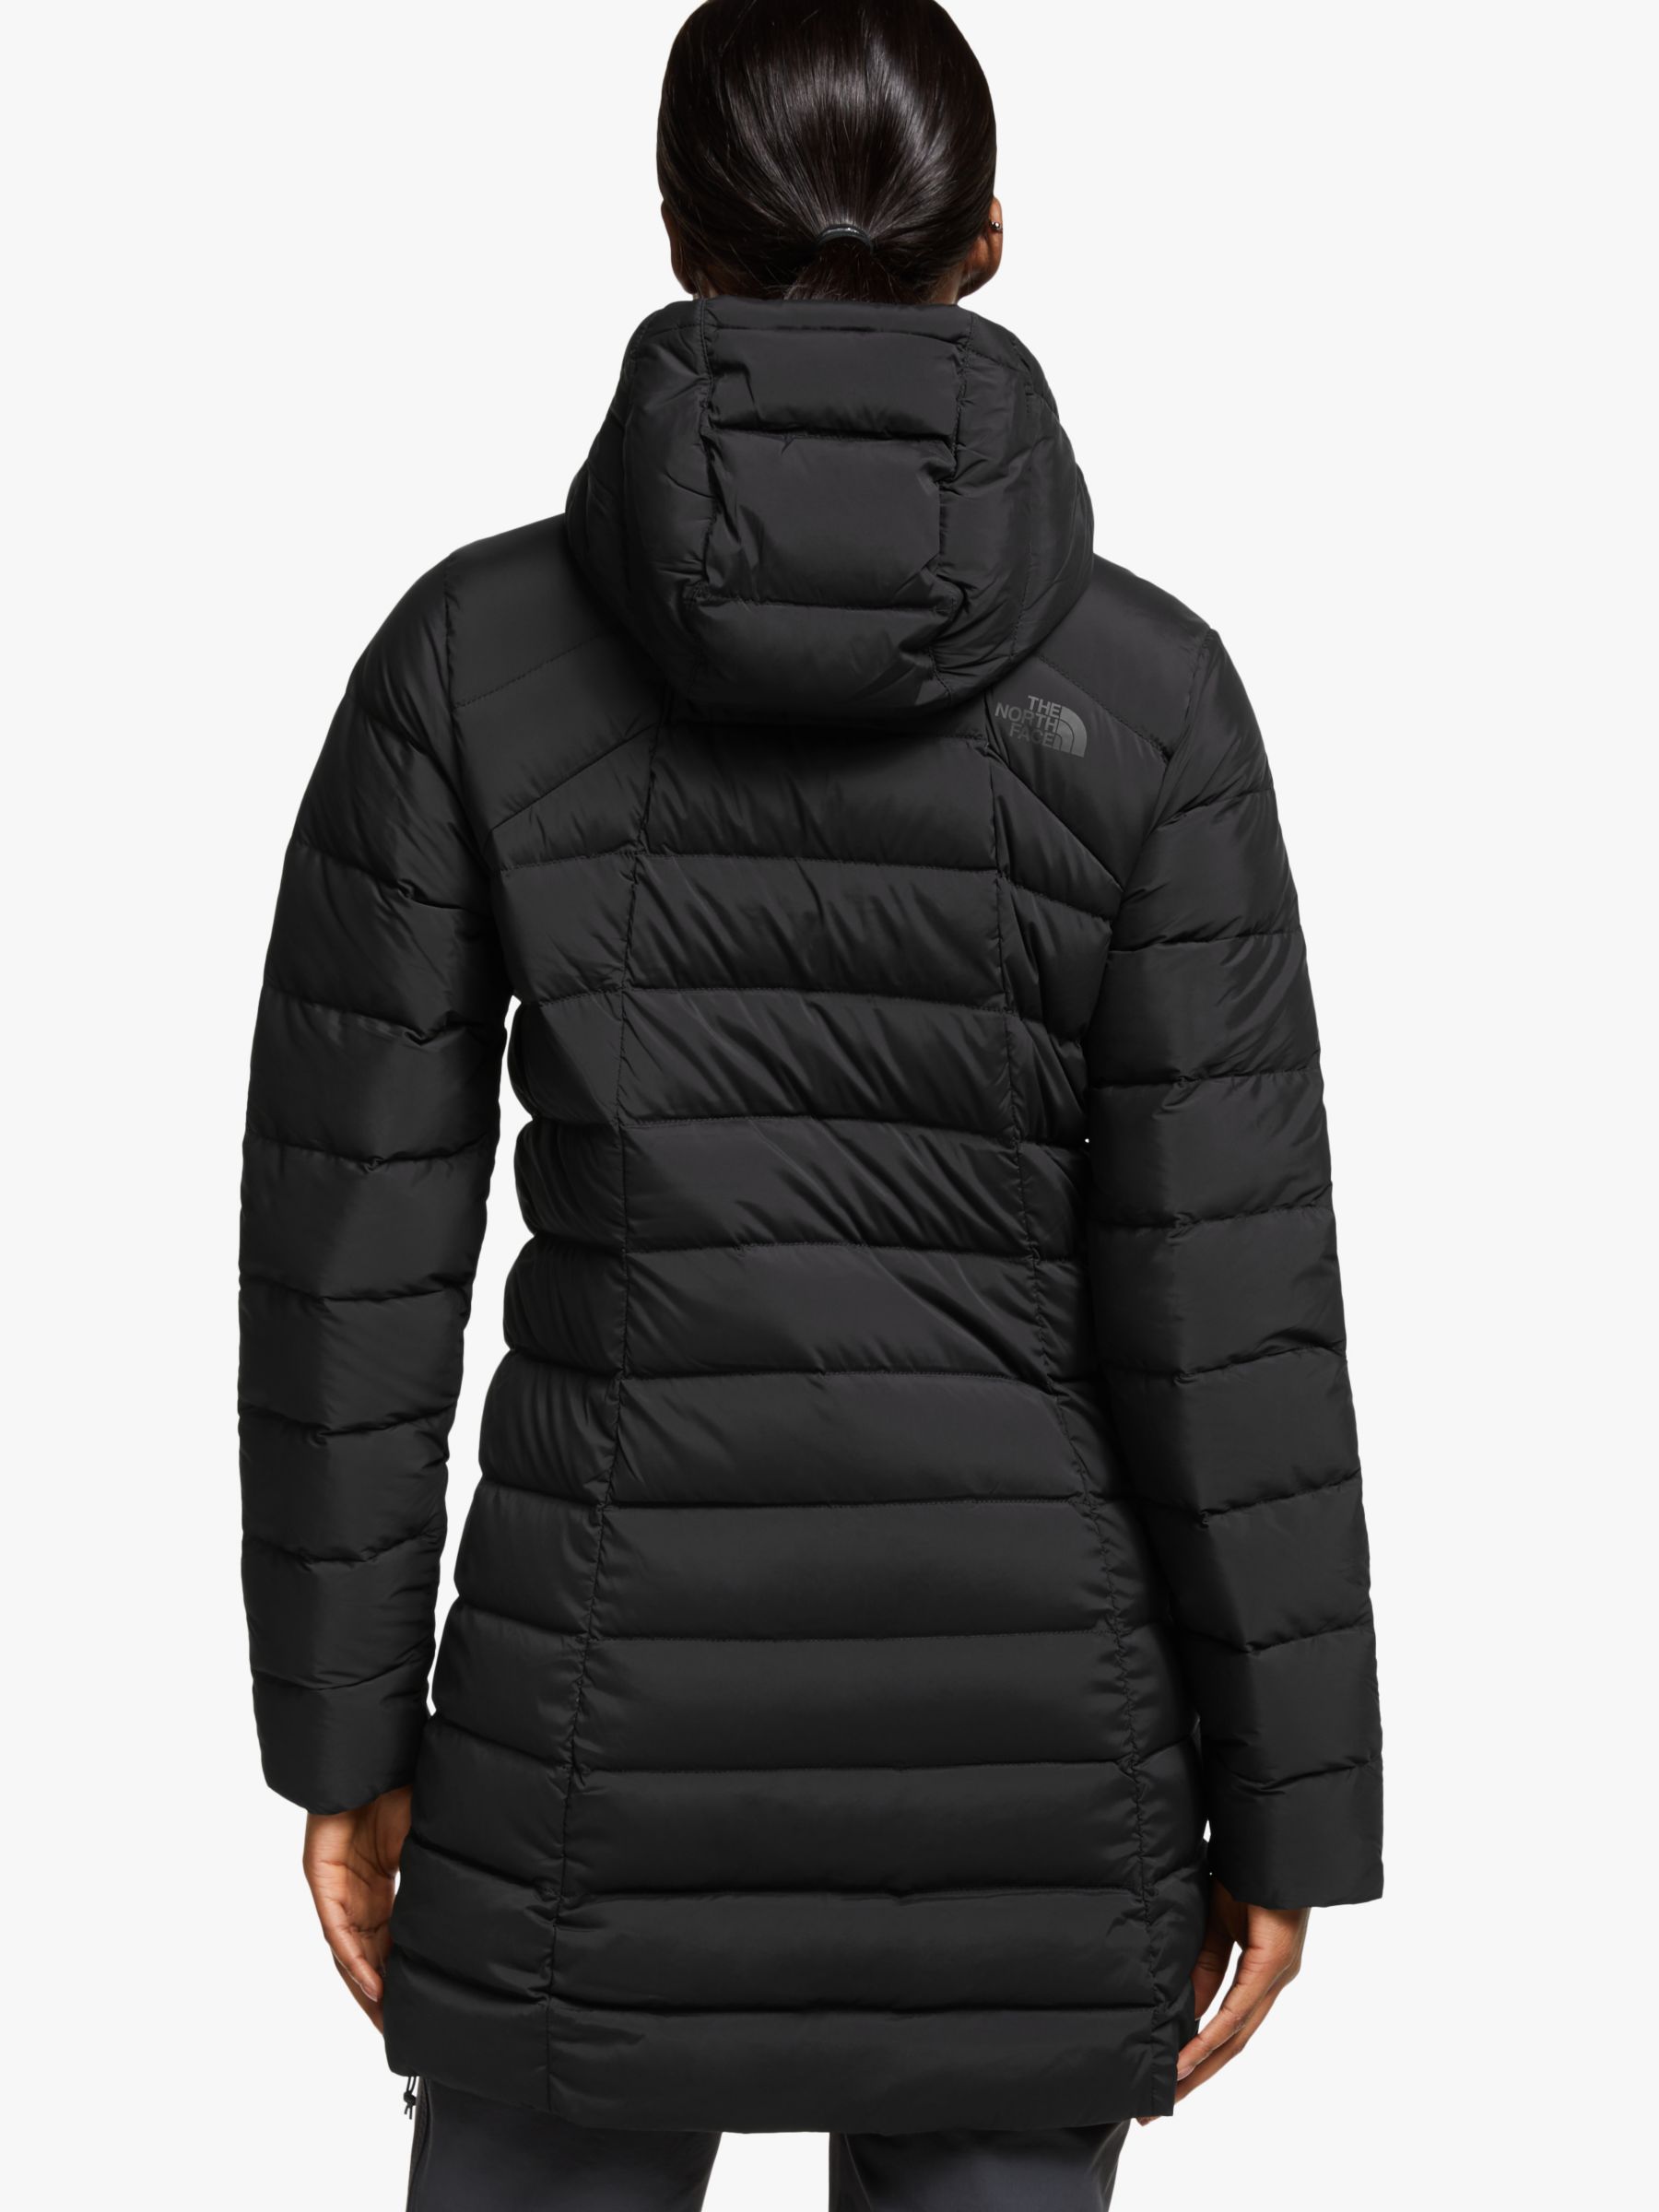 The North Face Women's Parka Jacket at John Lewis & Partners